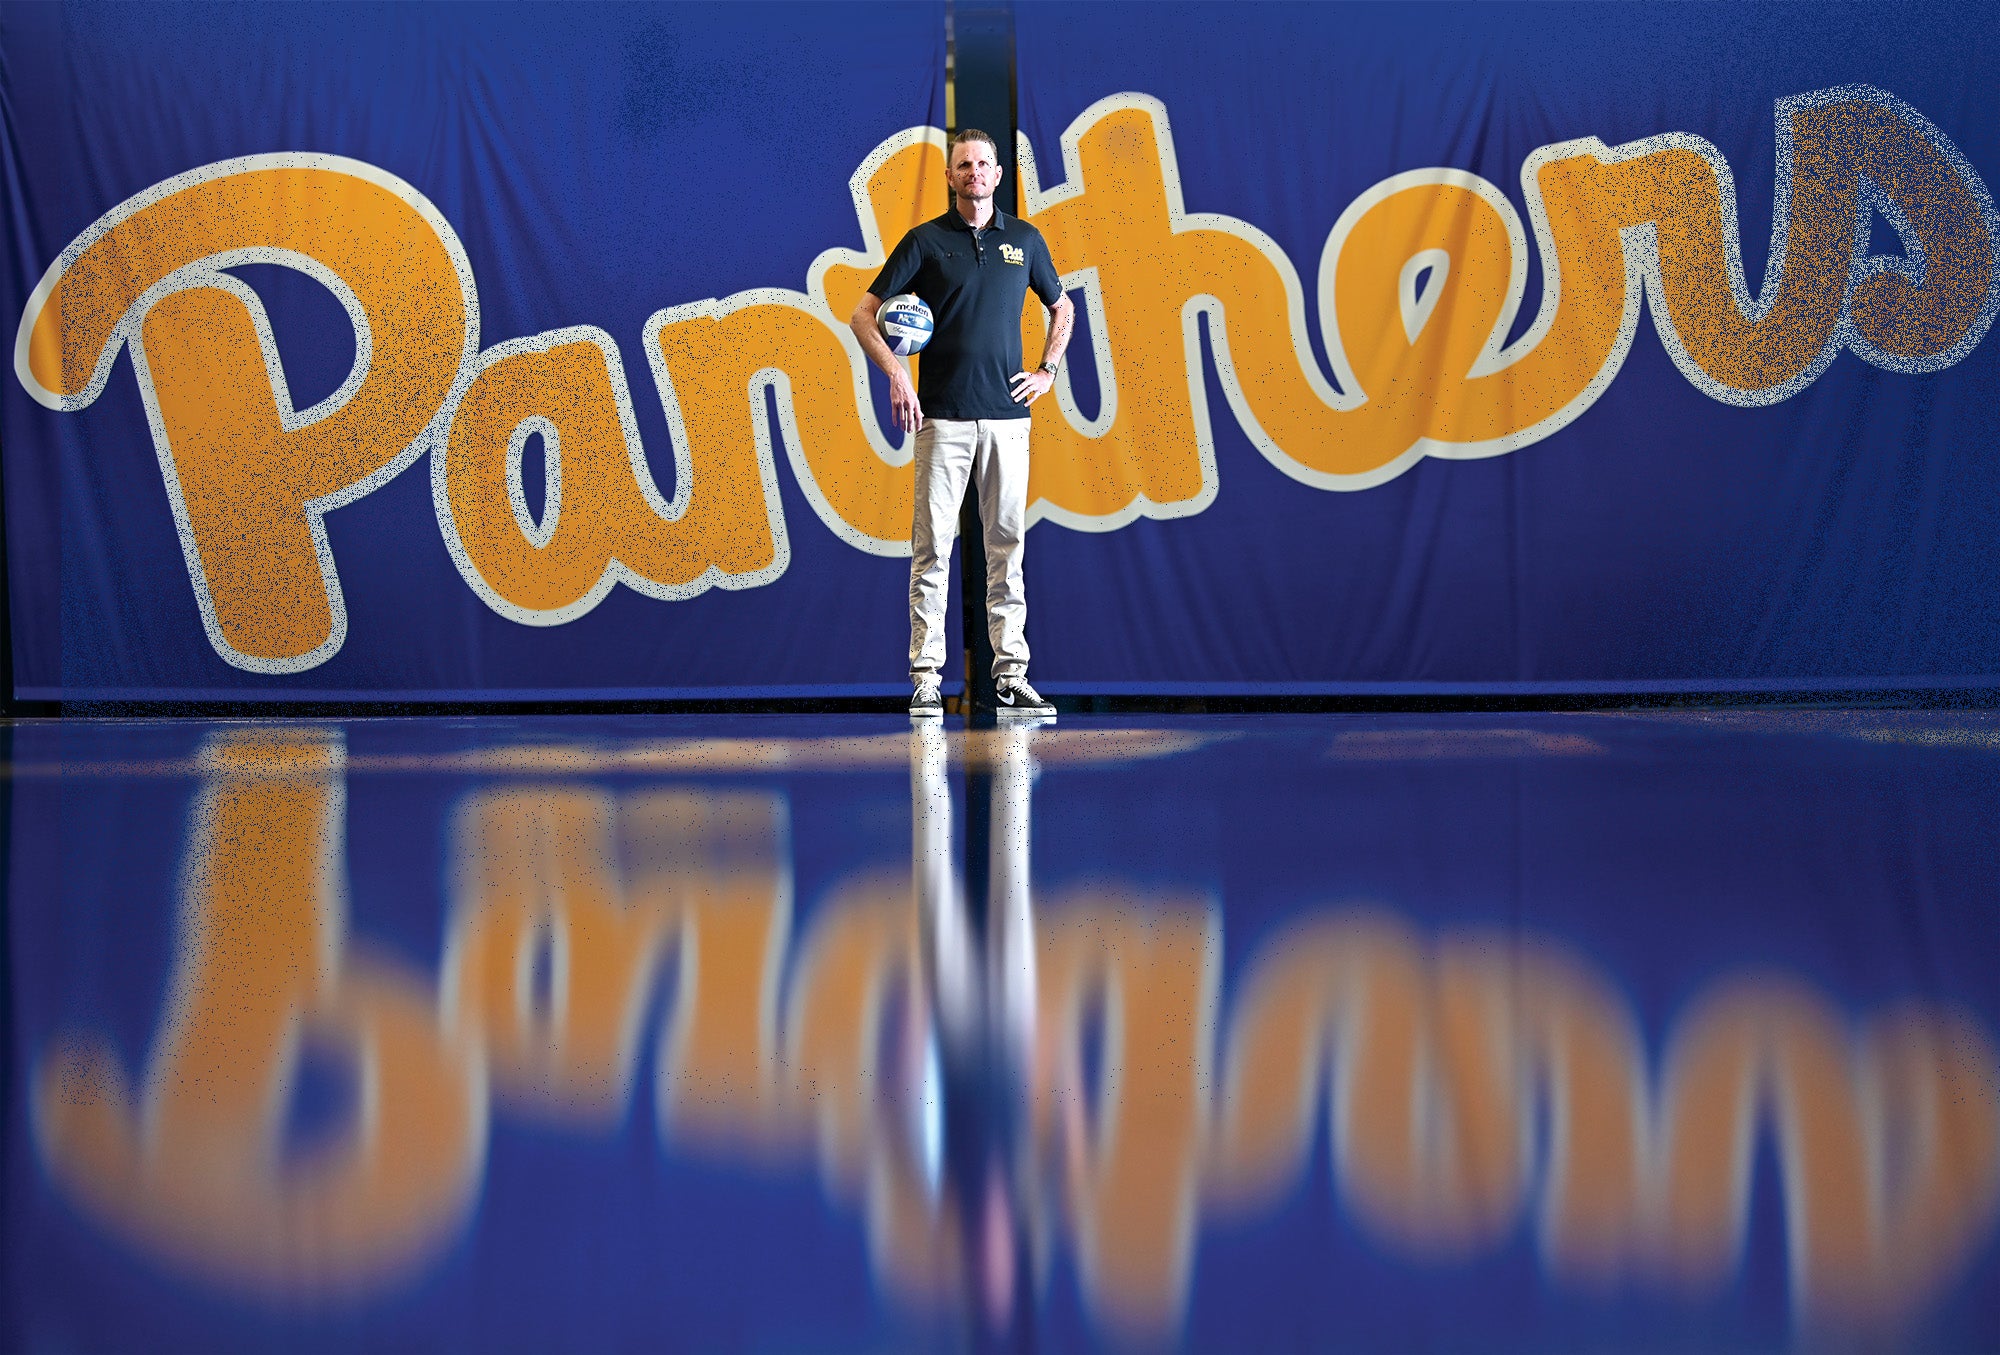 Fisher stands holding a volleyball in front of a Panthers logo